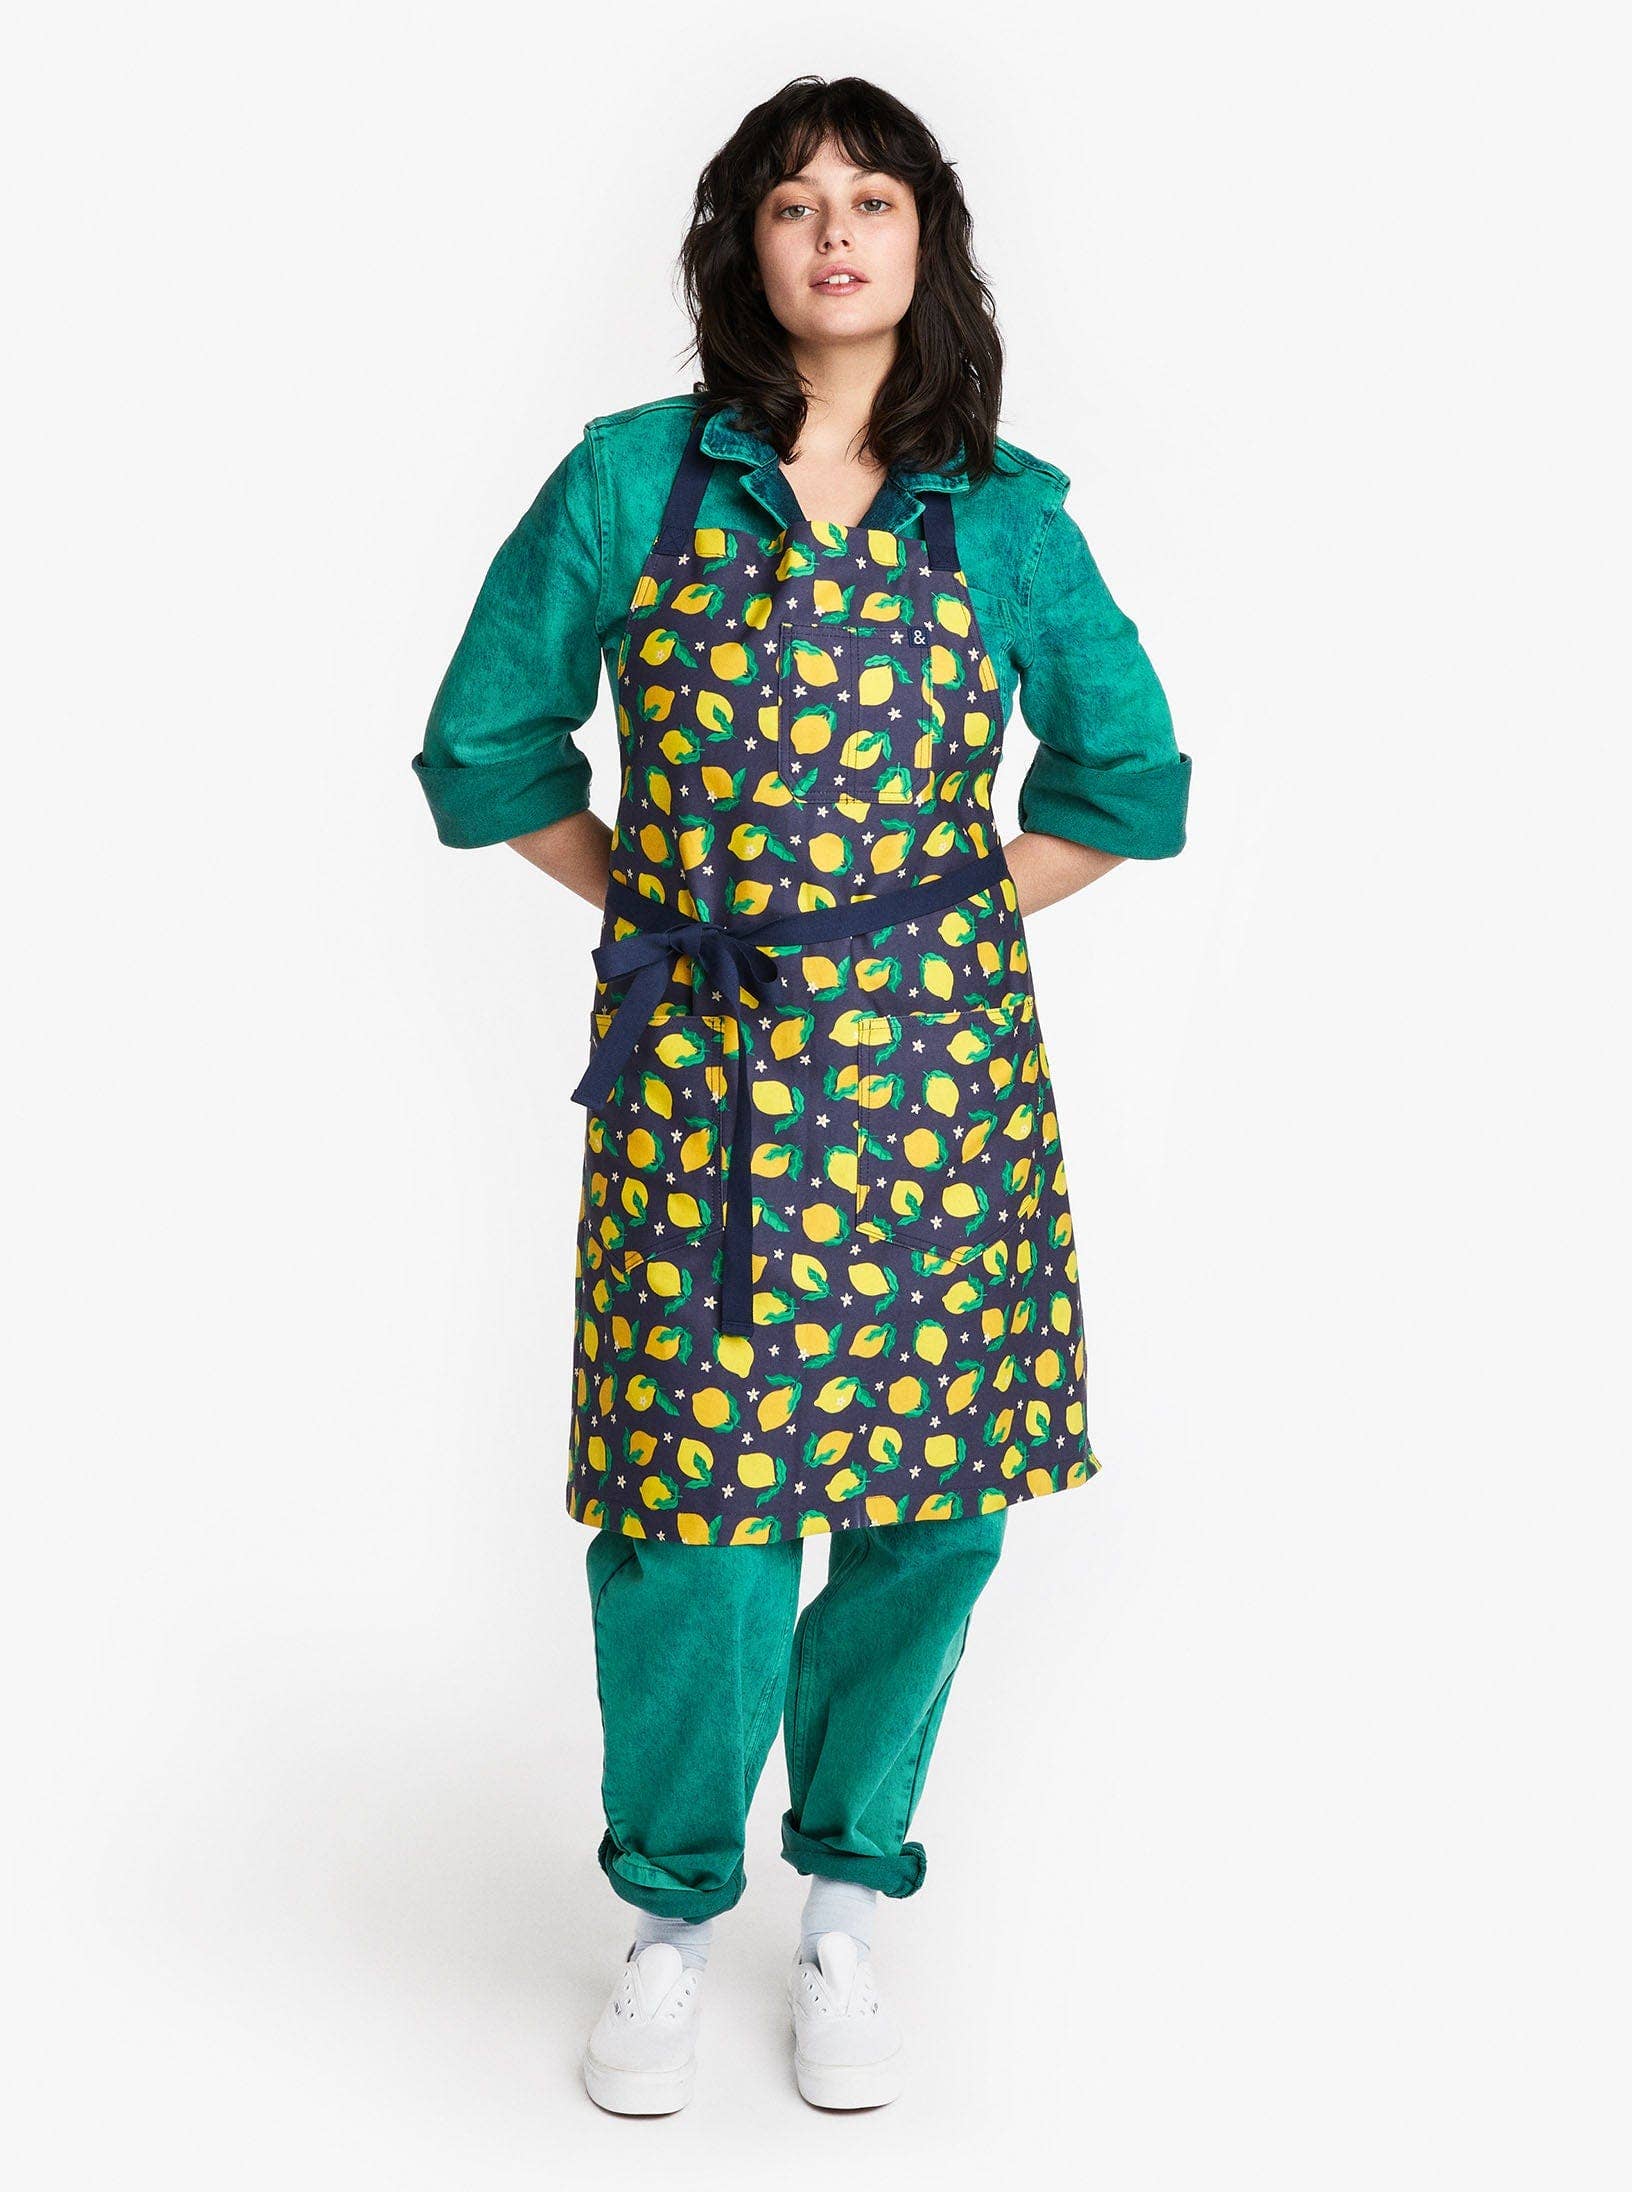 Apron worn on model -- apron is dark blue with lemons all over 